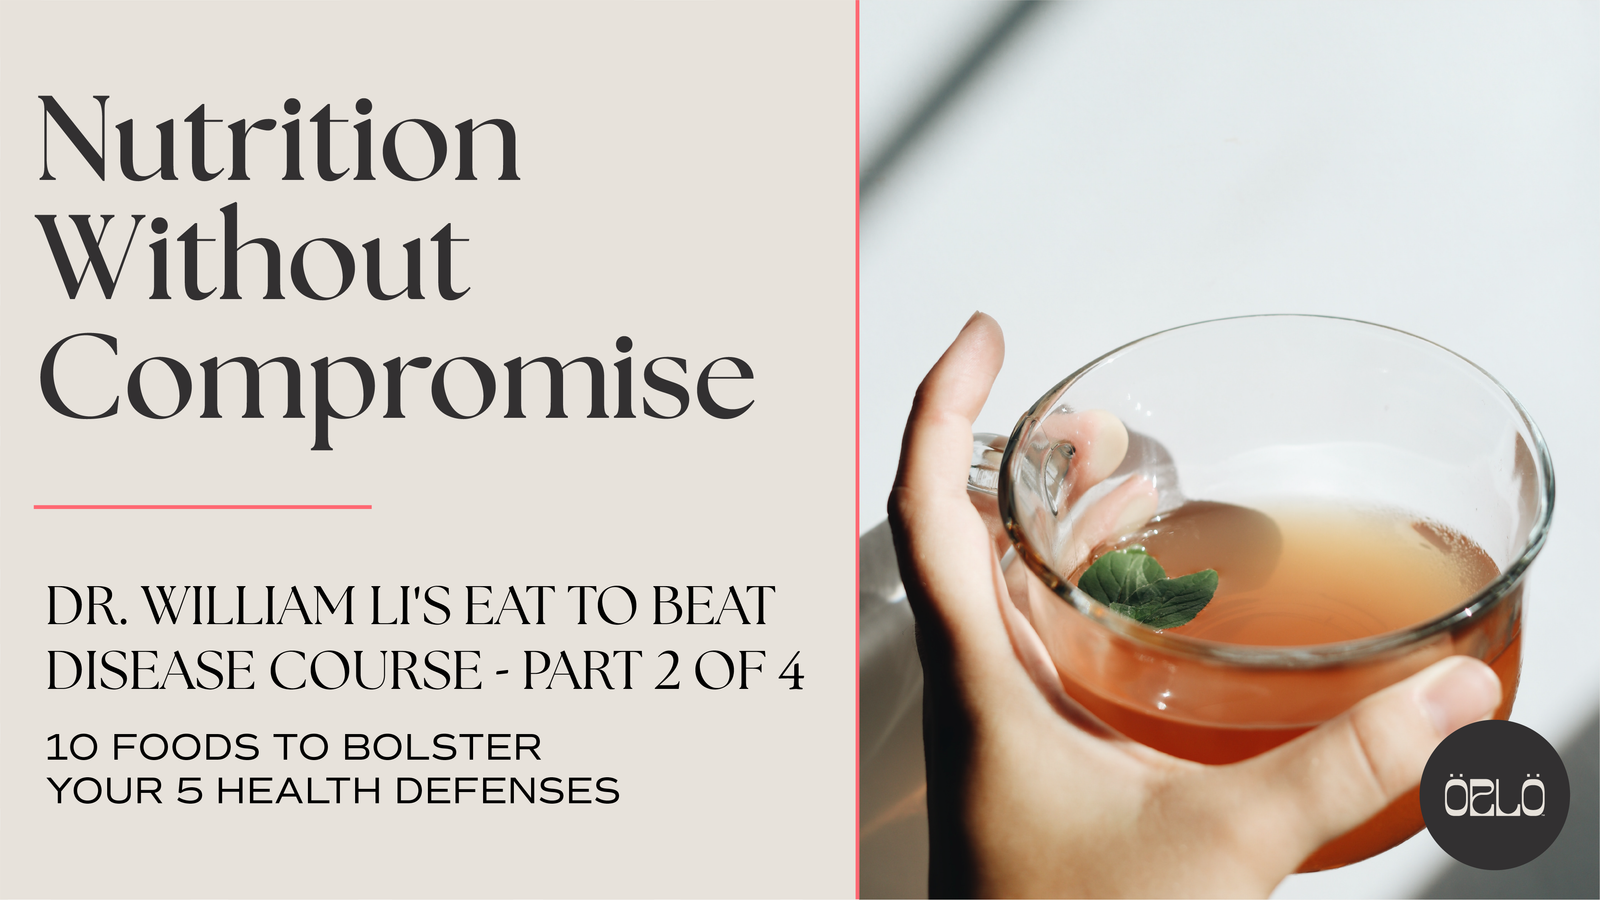 Dr. William Li's Eat To Beat Disease Course - 10 Foods to Bolster Your 5 Health Defenses - Part 2 of 4